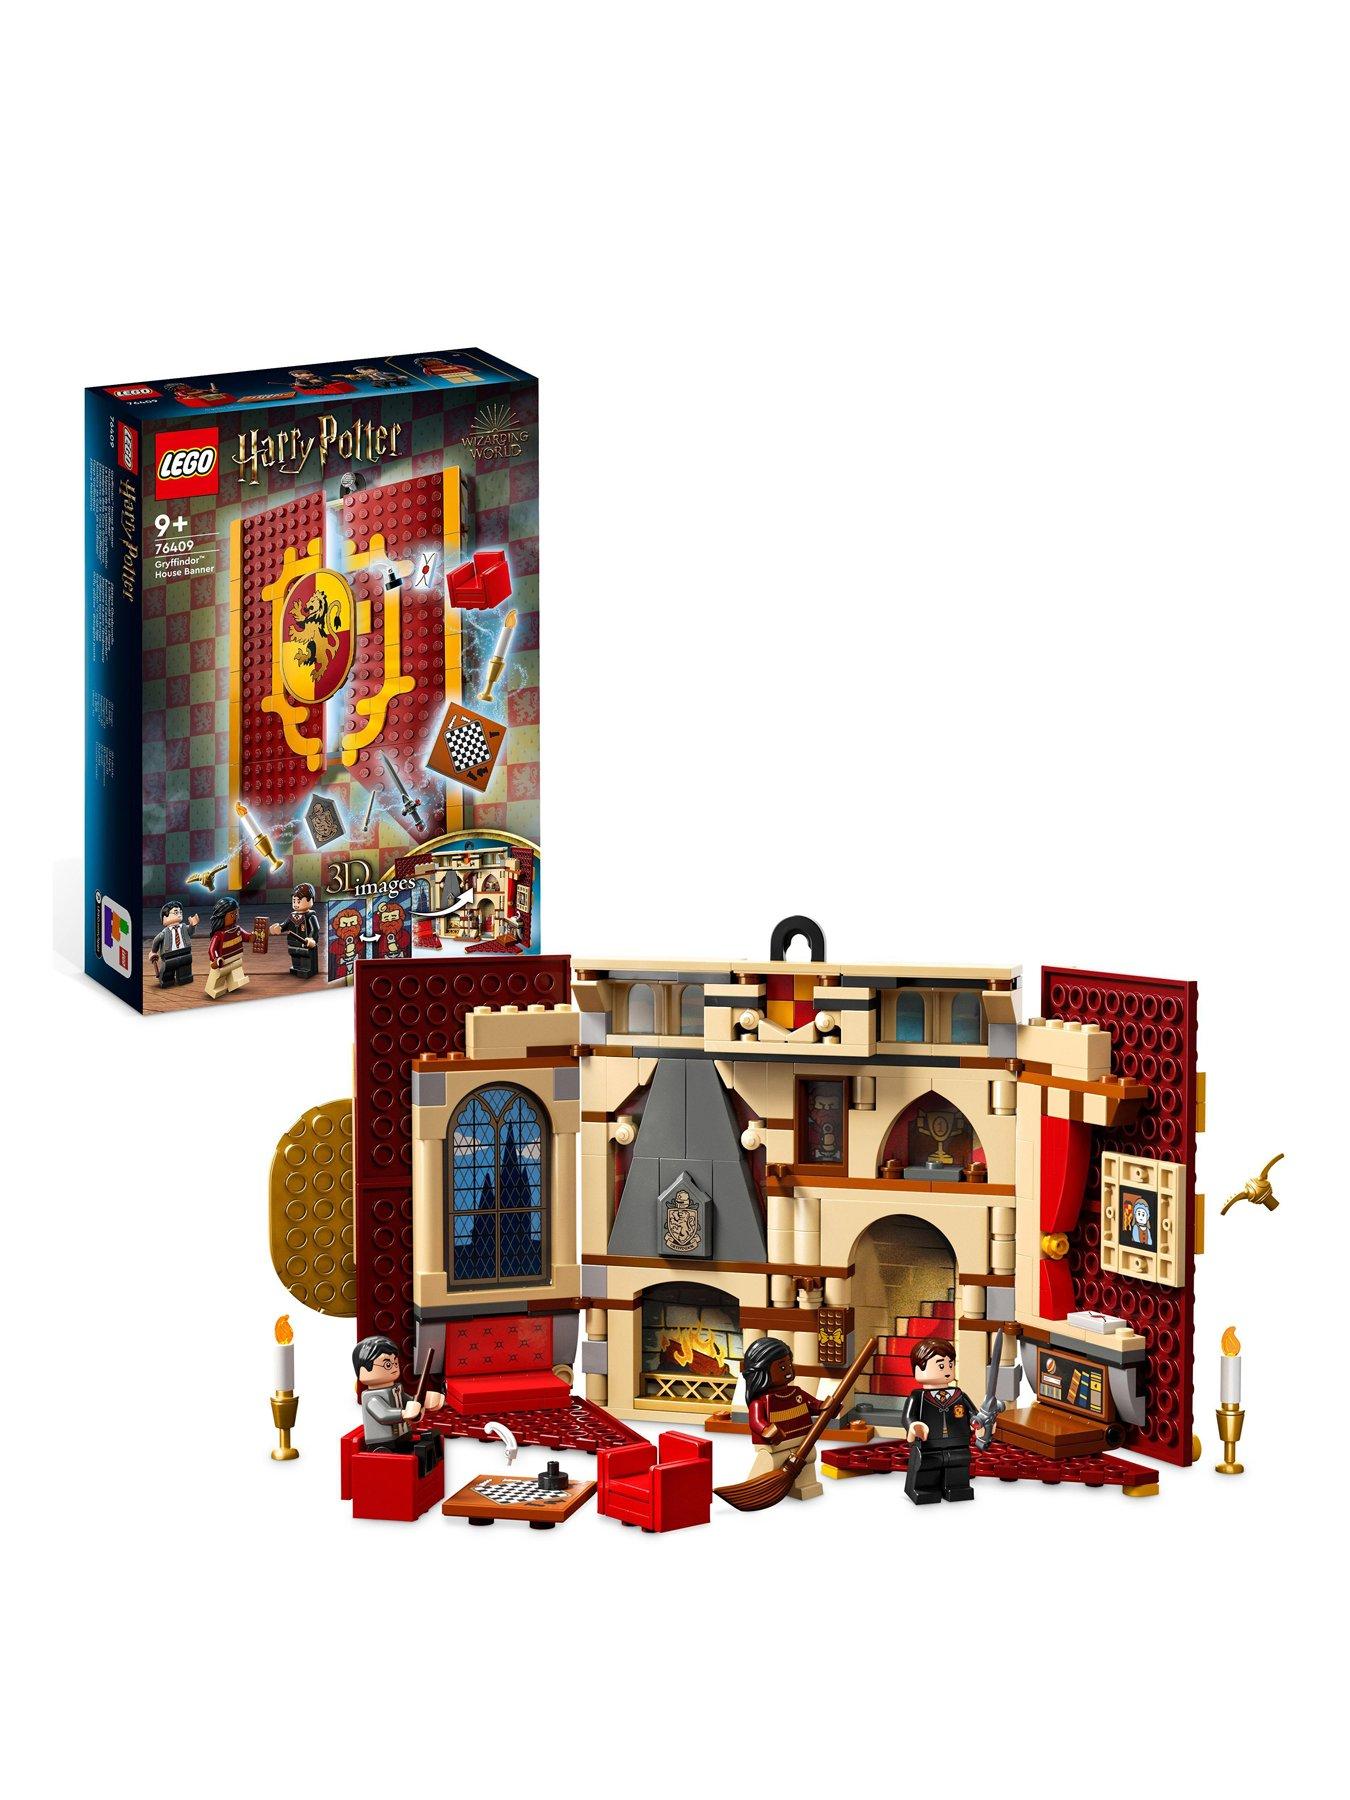 LEGO Harry Potter Hogwarts Astronomy Tower 75969, Castle Toy Playset with 8  Character Minifigures including Harry Potter and Draco Malfoy, Wizarding